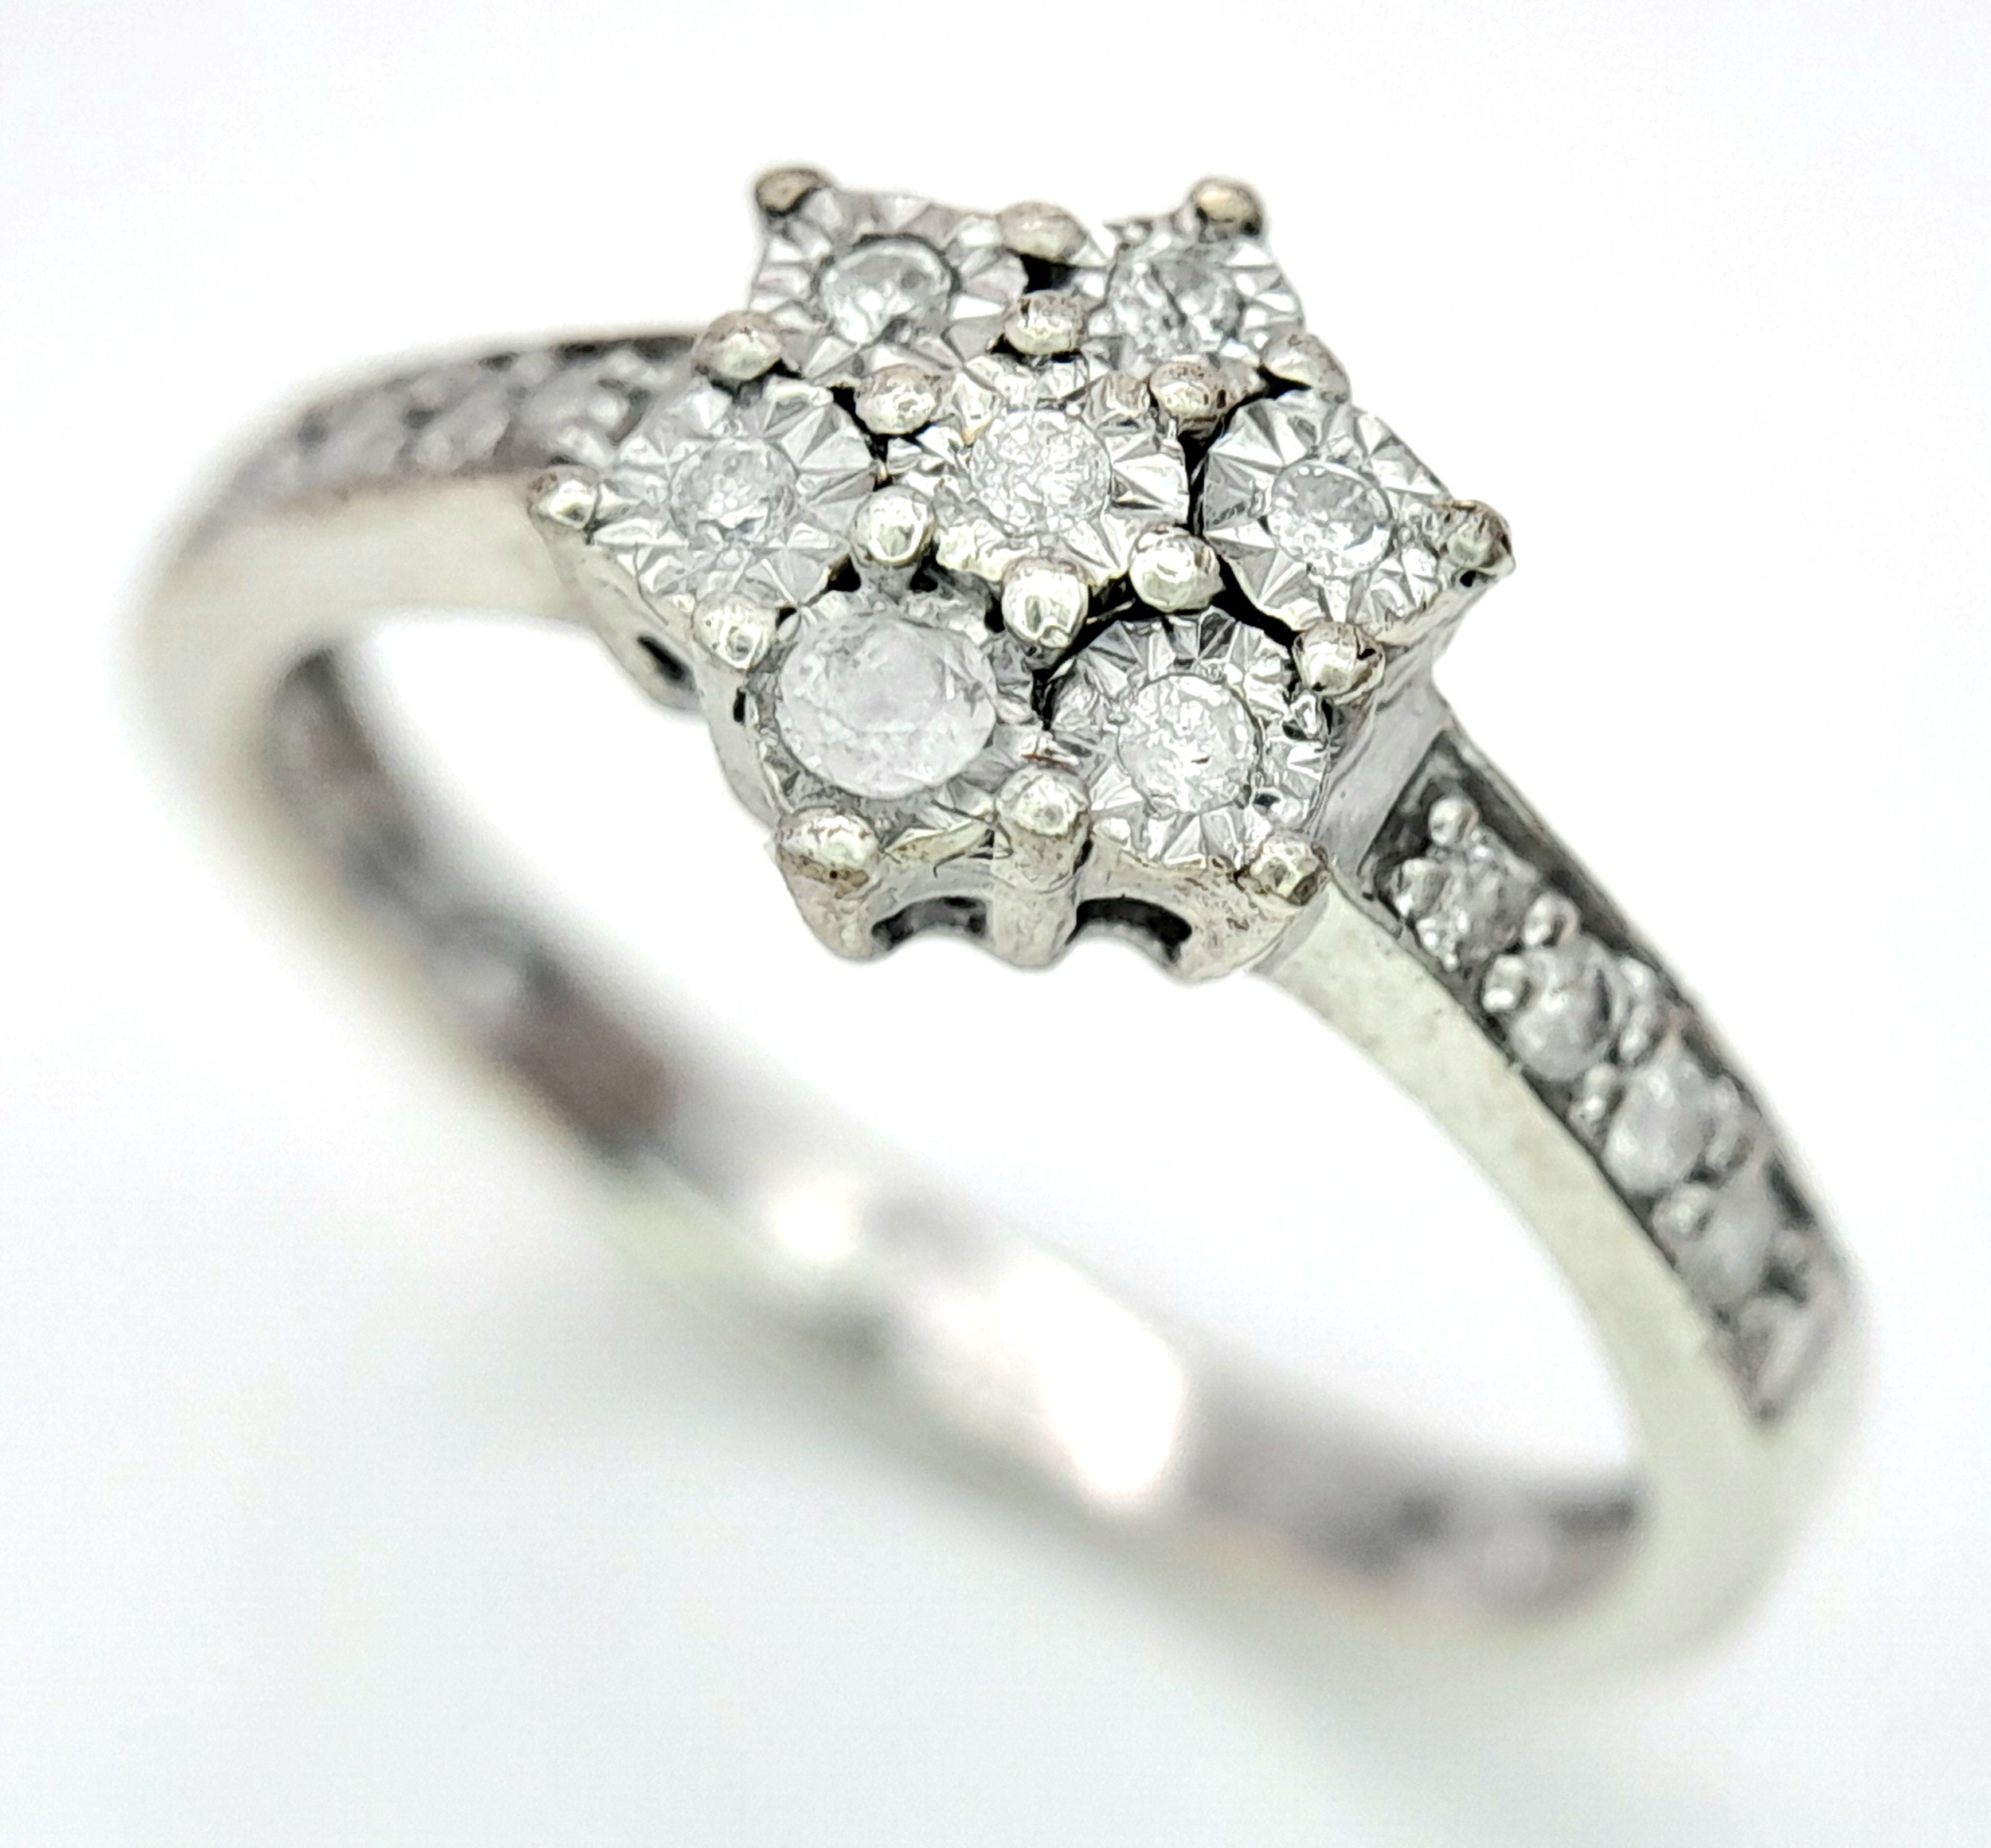 A 9K WHITE GOLD DIAMOND RING. Size M, 2.5g total weight. Ref: SC 8019 - Image 4 of 6